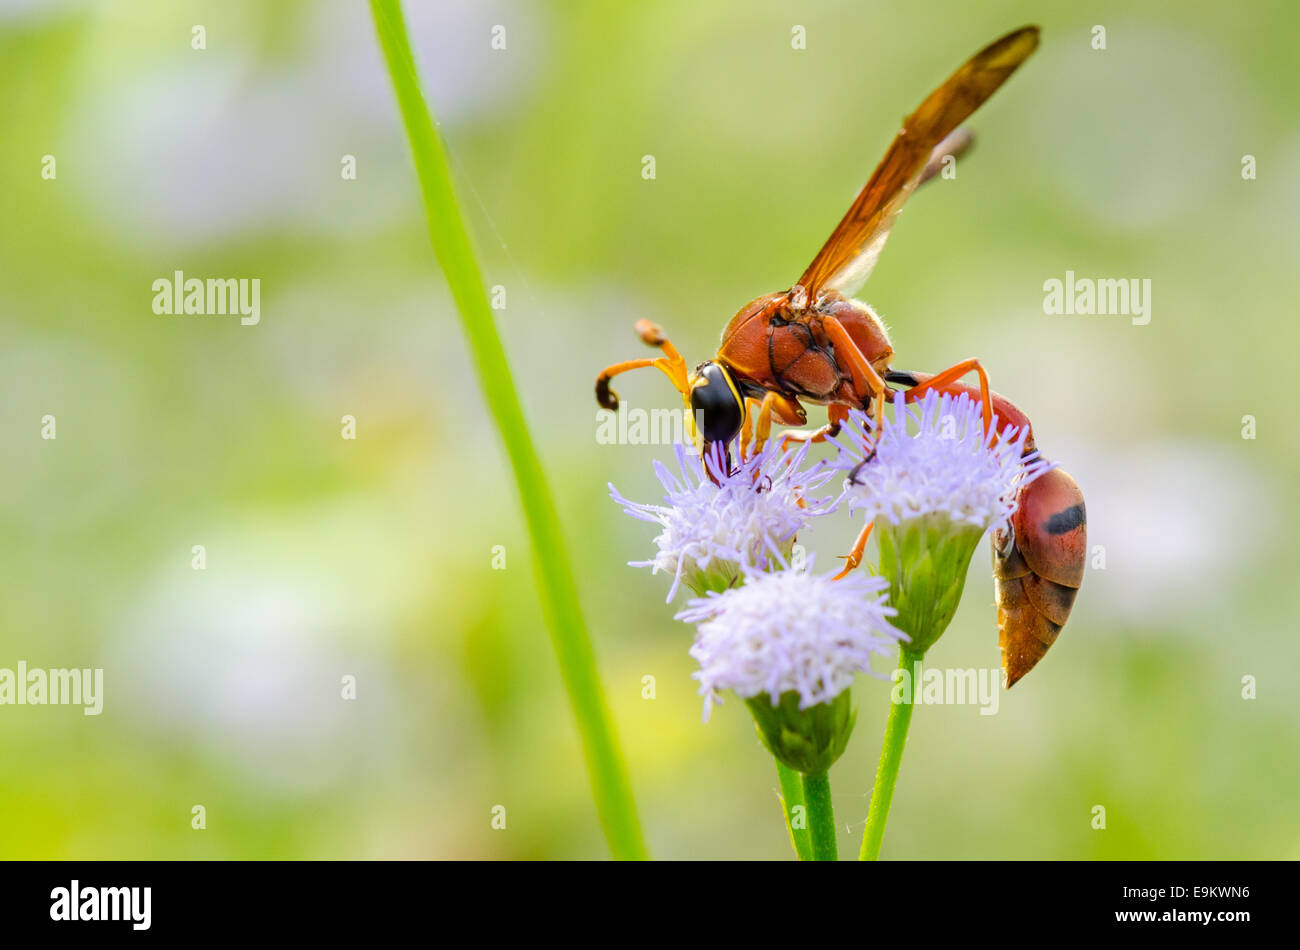 Potter Wasp or Eumenes latreilli, Predatory insects eating nectar taken in Thailand Stock Photo